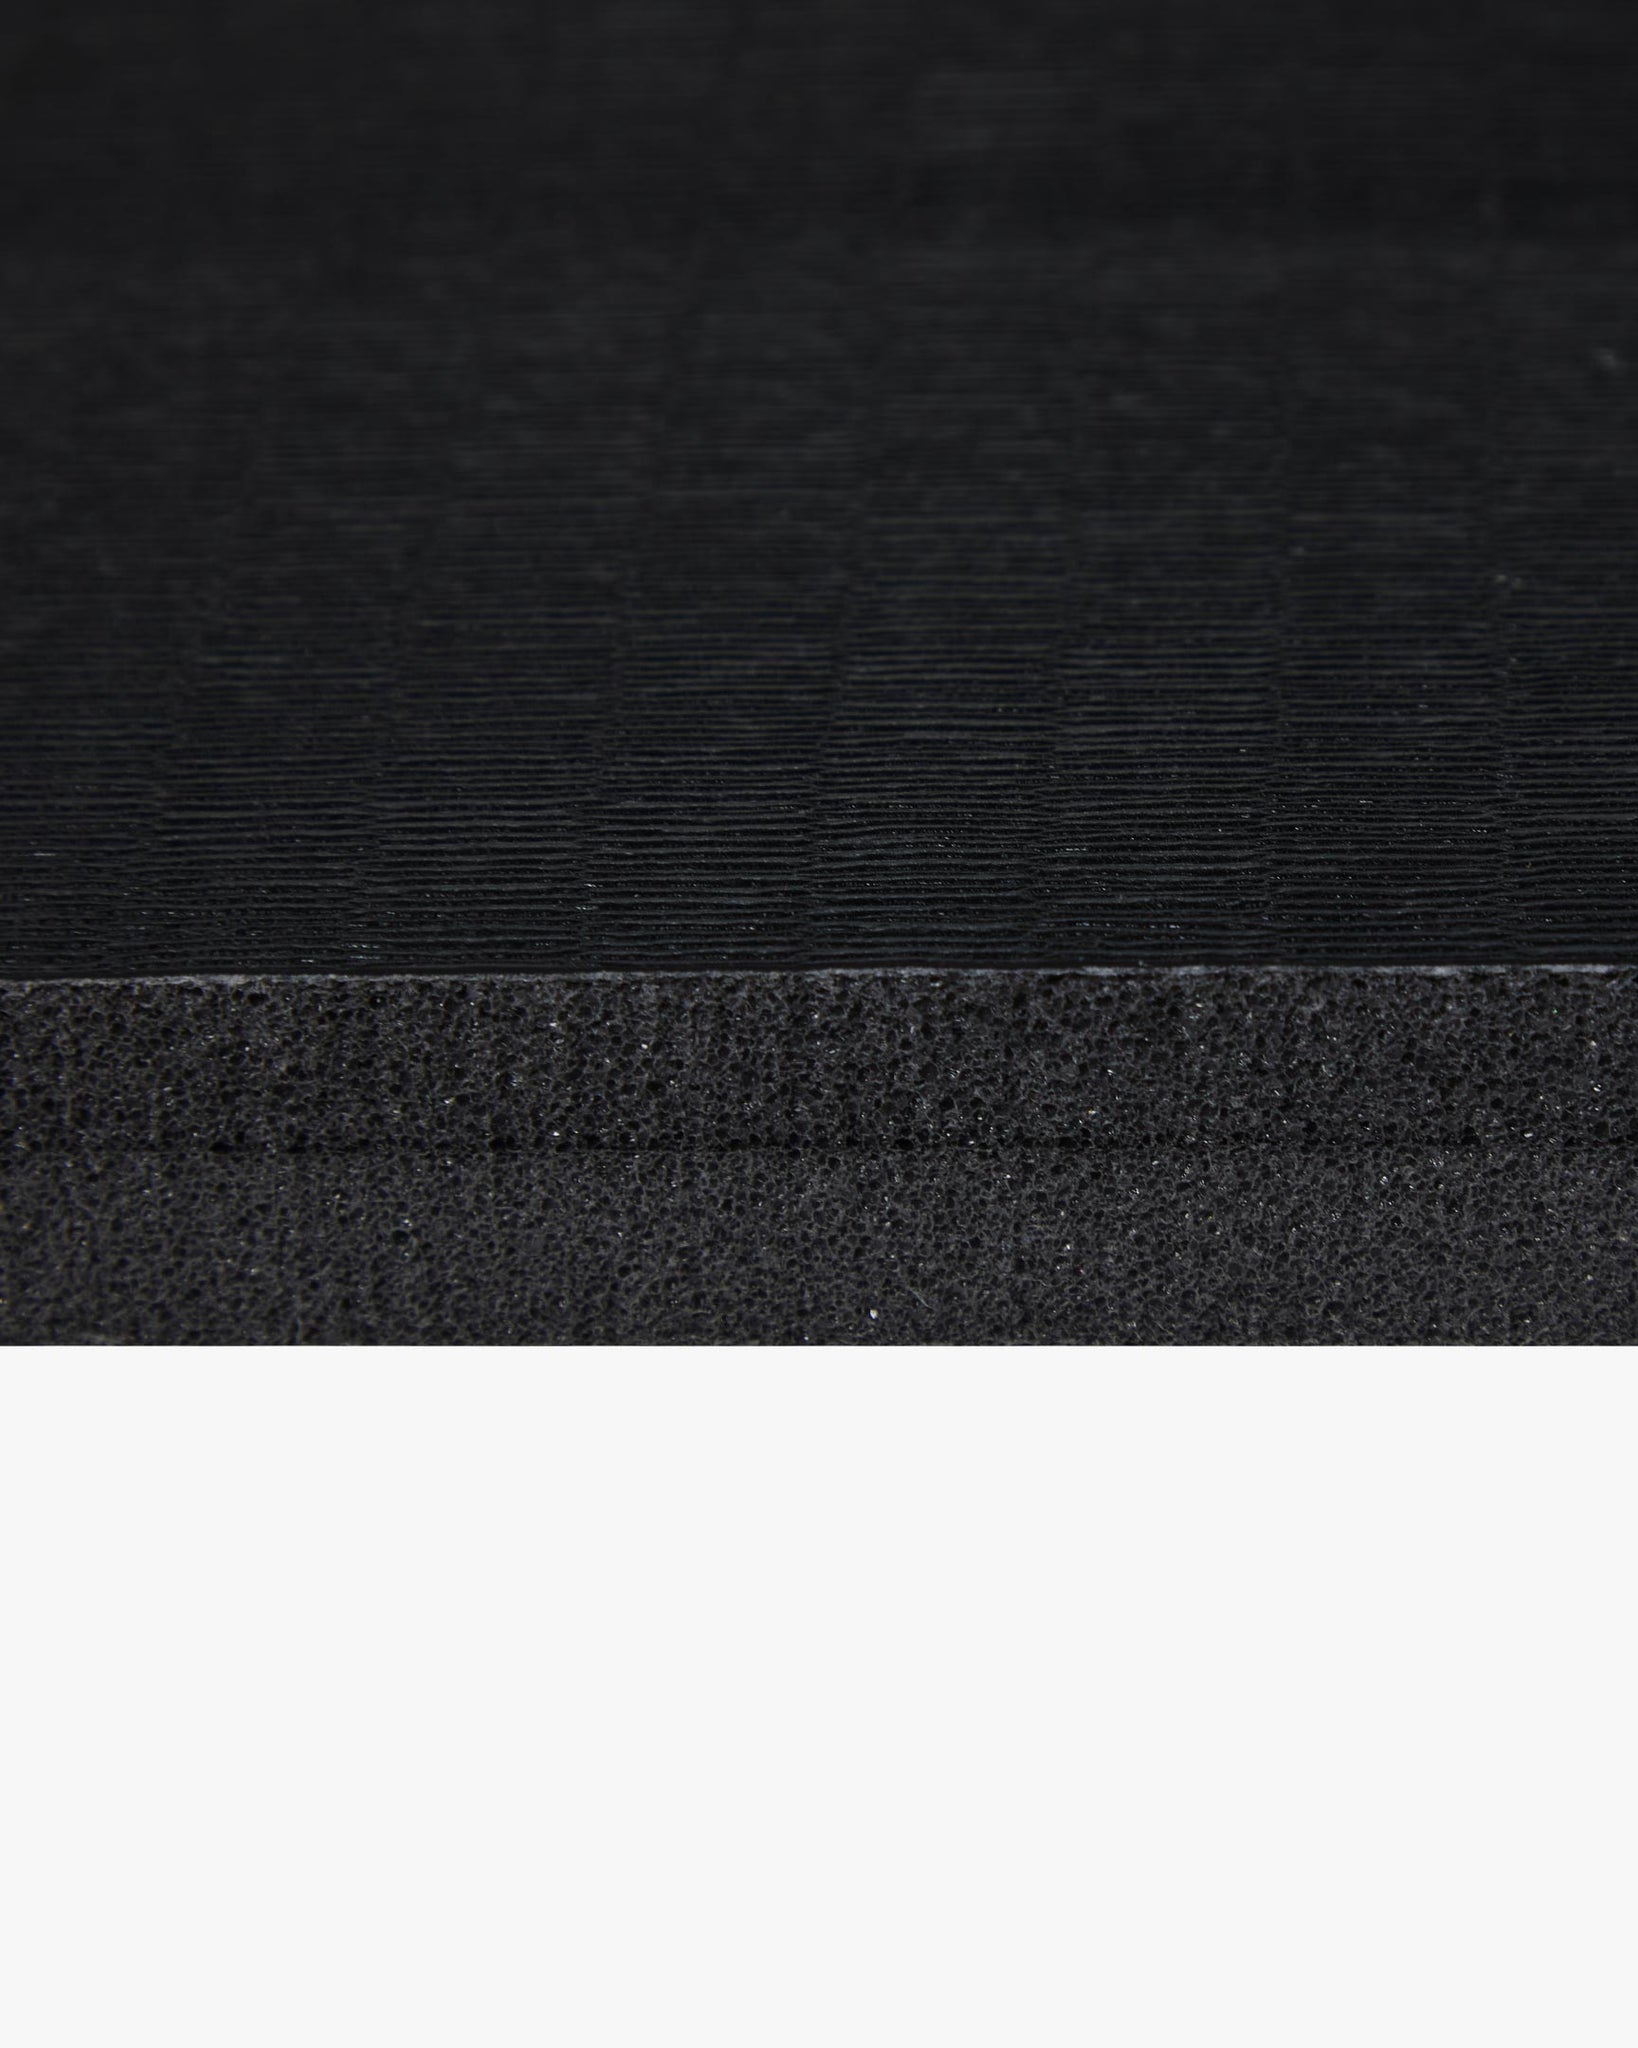 Home Tatami Rollout Mat - 5' x 10' 1.25" Thick Black